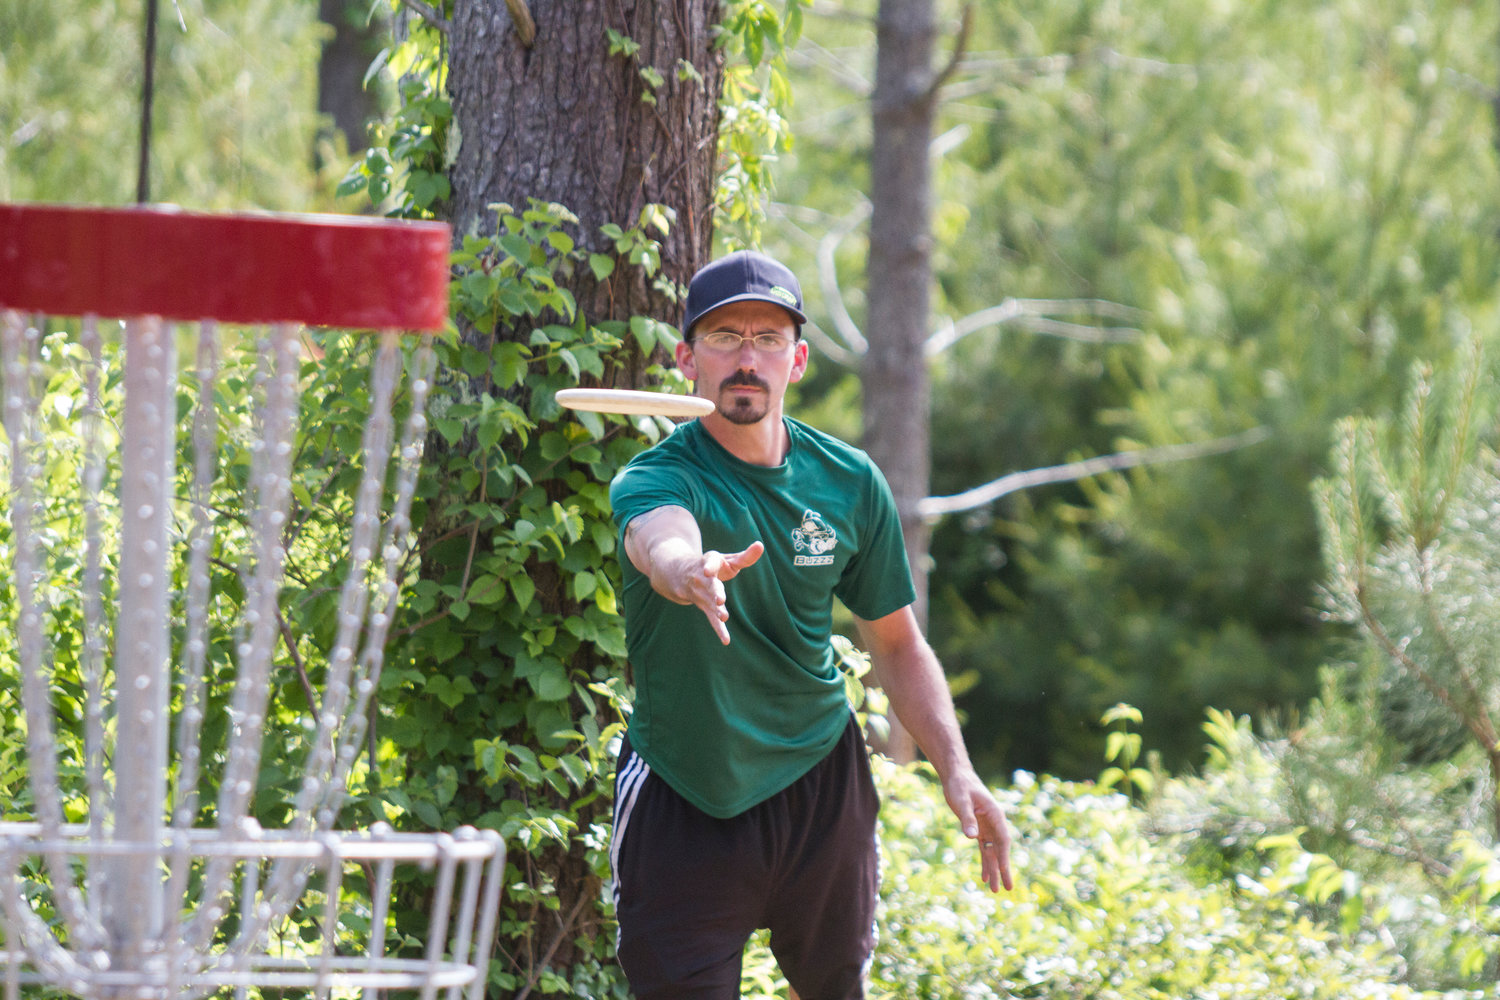 The Nantucket Disc Golf Open brings some of the best professional and amateur disc golf players to the island Sept. 10 and 11. The state forest course is considered one of the best in the Northeast.